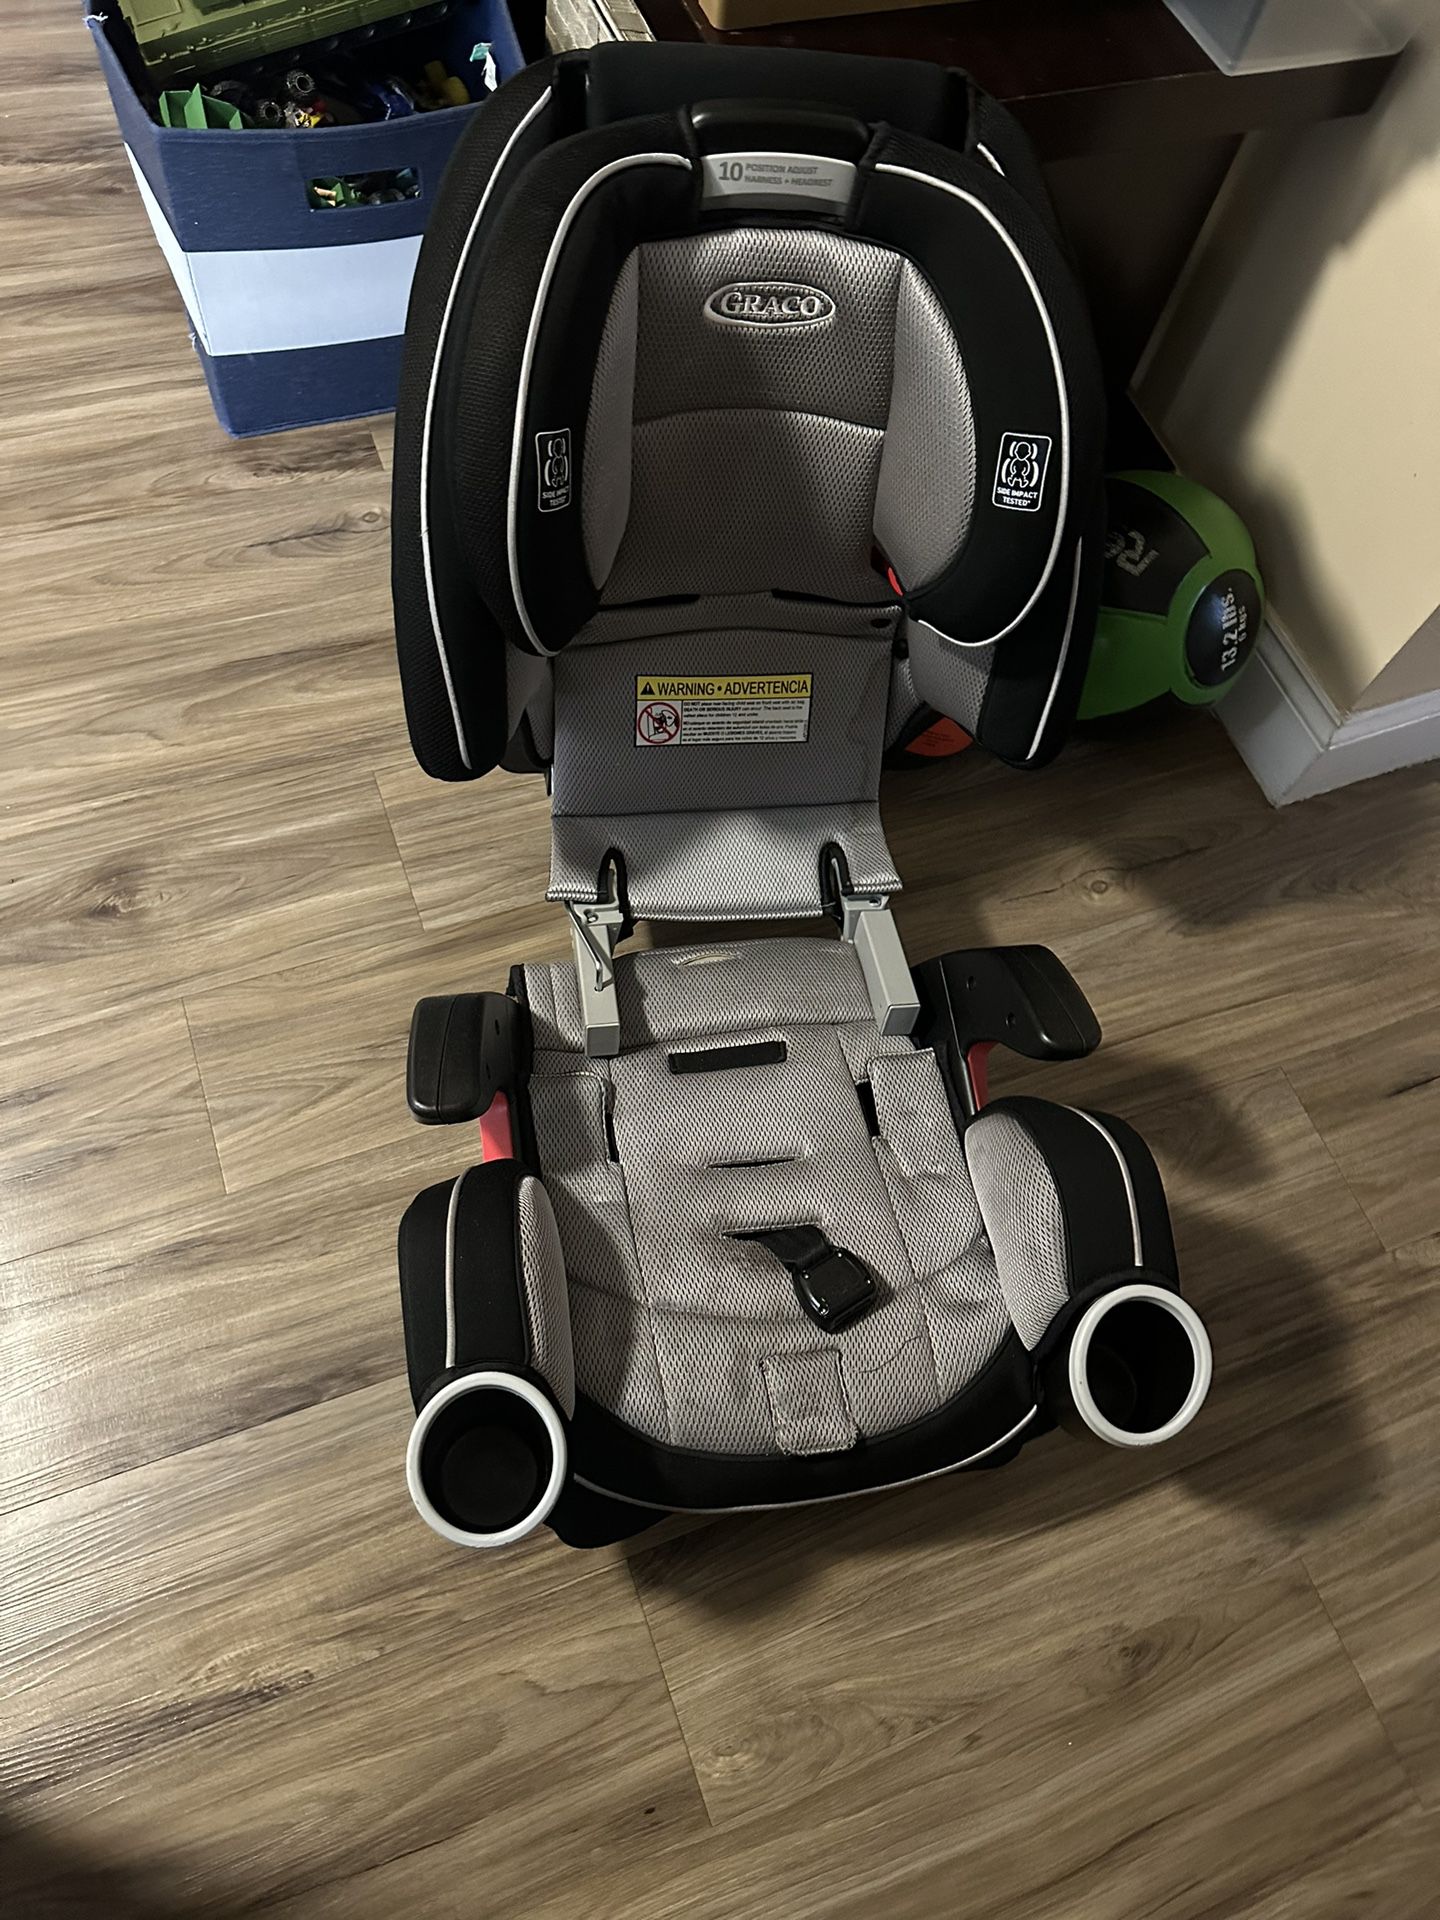 Graco Forever Car Seat.